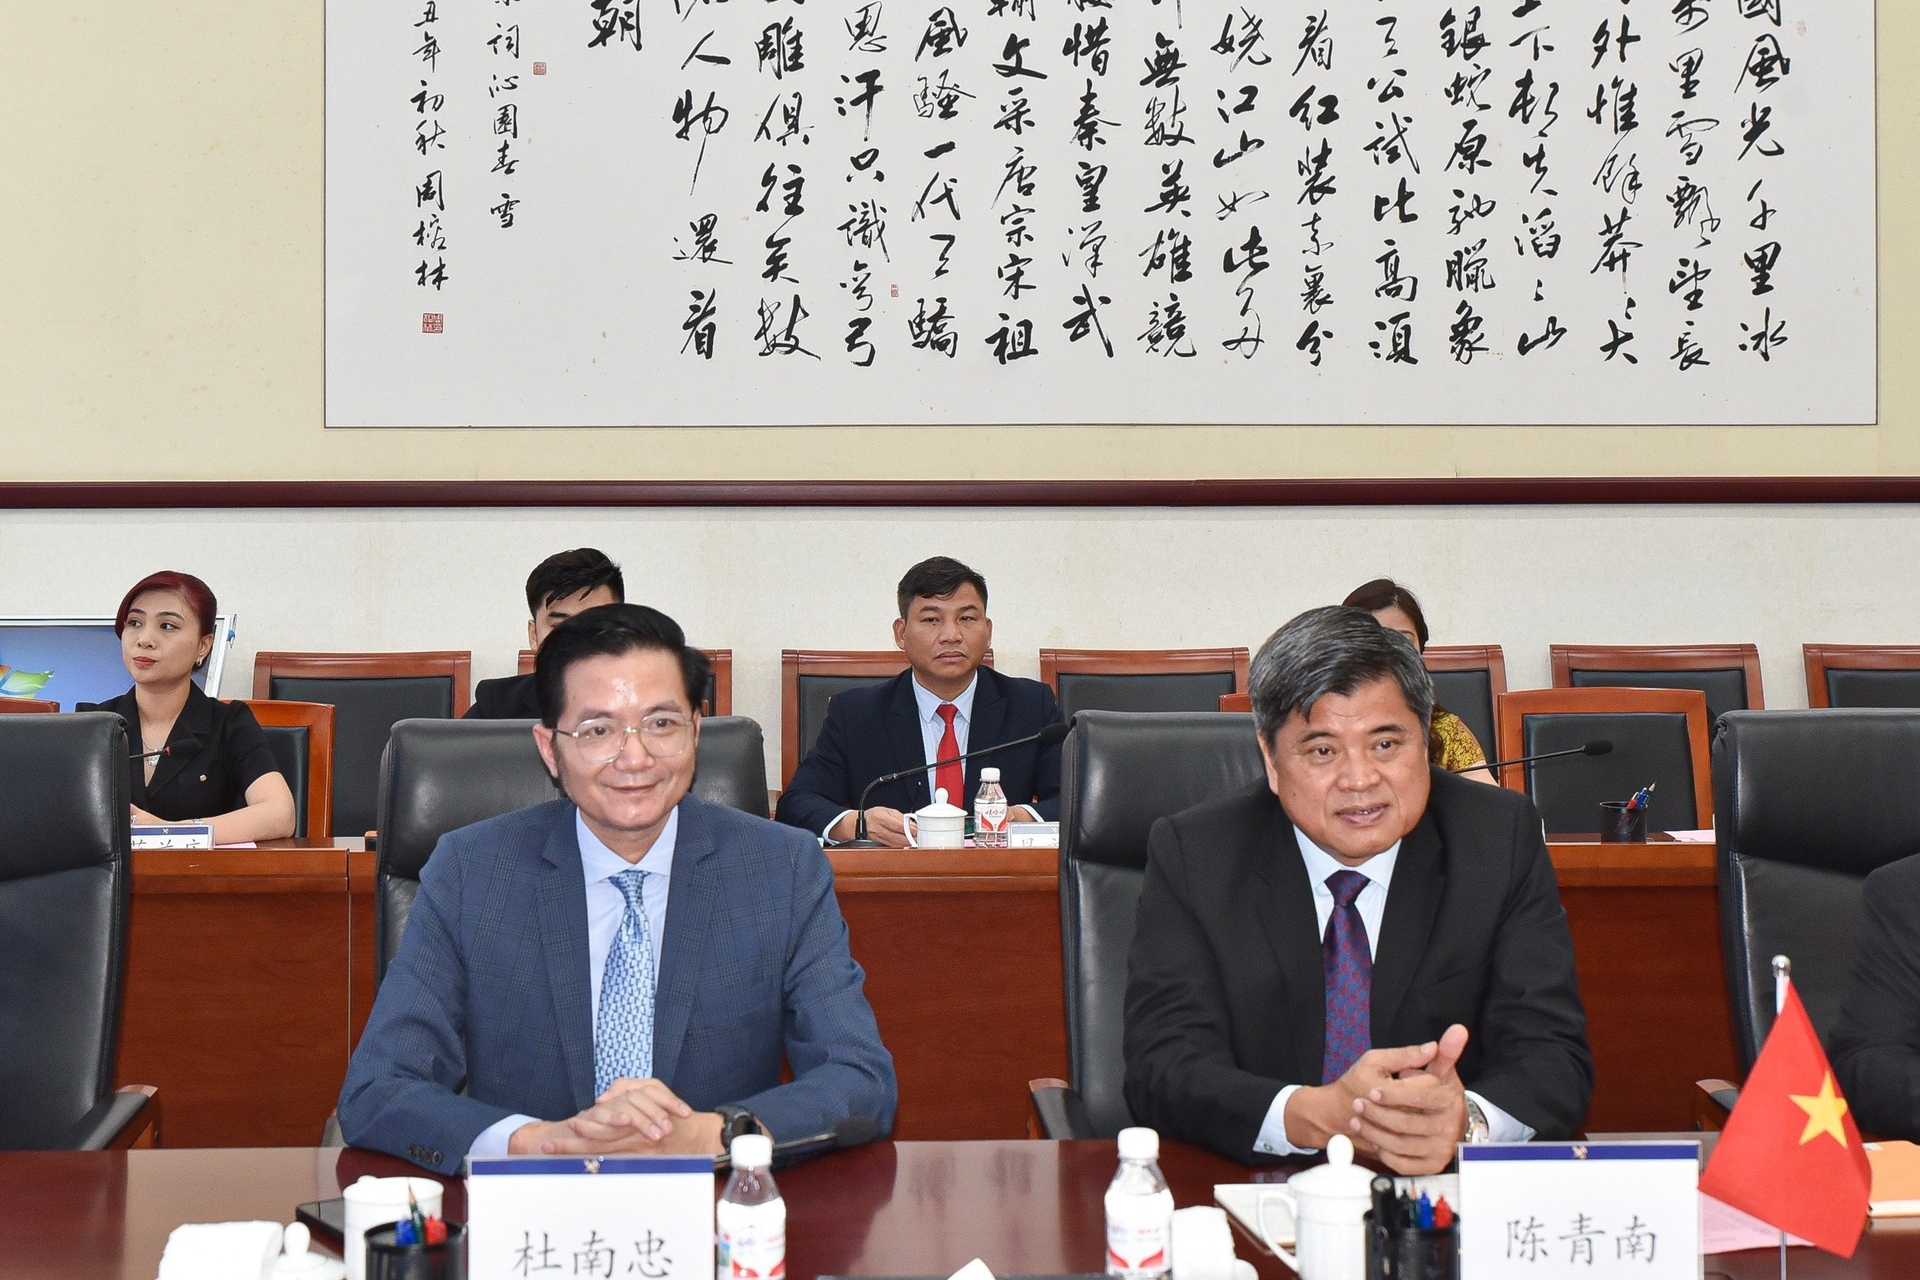 Mr. Do Nam Trung, Consul General of Vietnam in Nanning, Guangxi (left) joining the Ministry of Agriculture and Rural Development in a meeting with Nanning. Photo: Cao Tran.